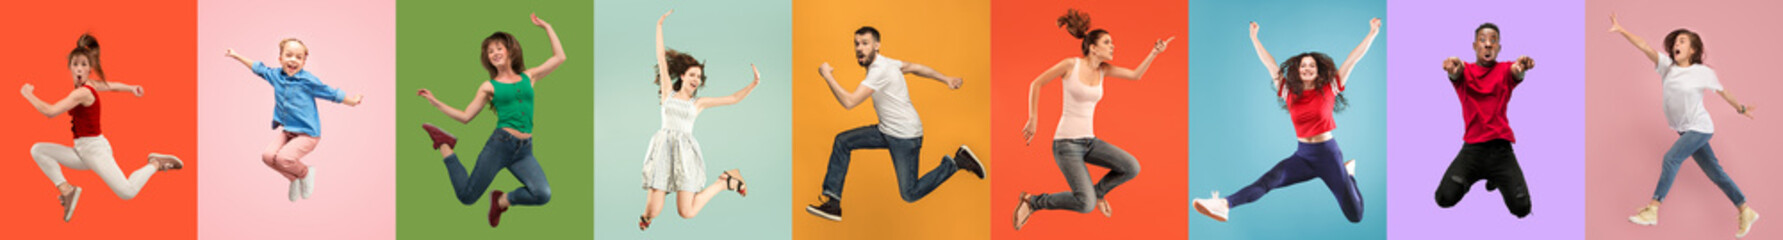 Young emotional people on multicolored backgrounds. Young surprised women jumping happy. Human...